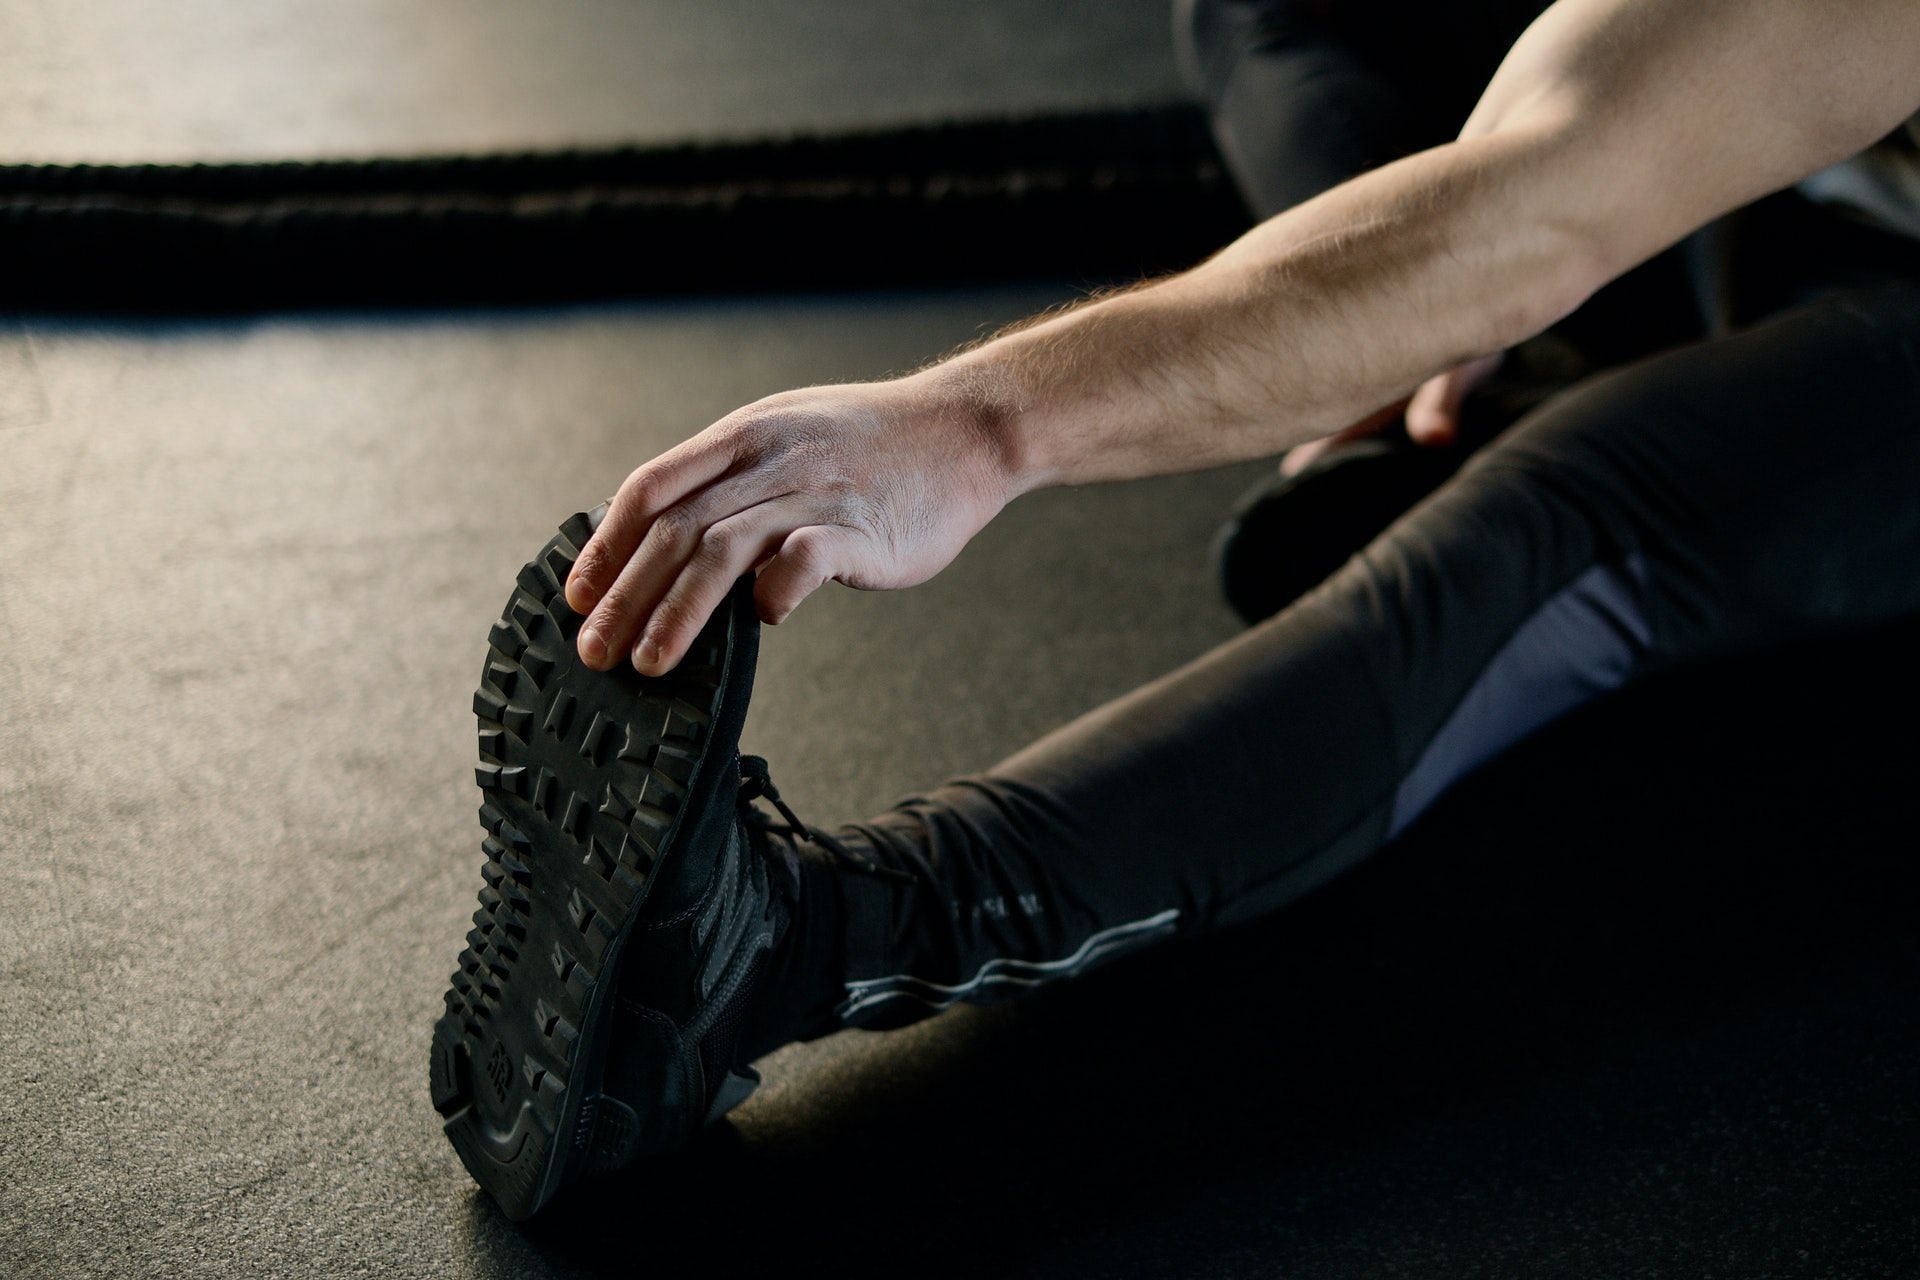 Plantar fasciitis is a painful condition affecting the bottom of the foot. (Photo by Ivan Samkov via pexels)